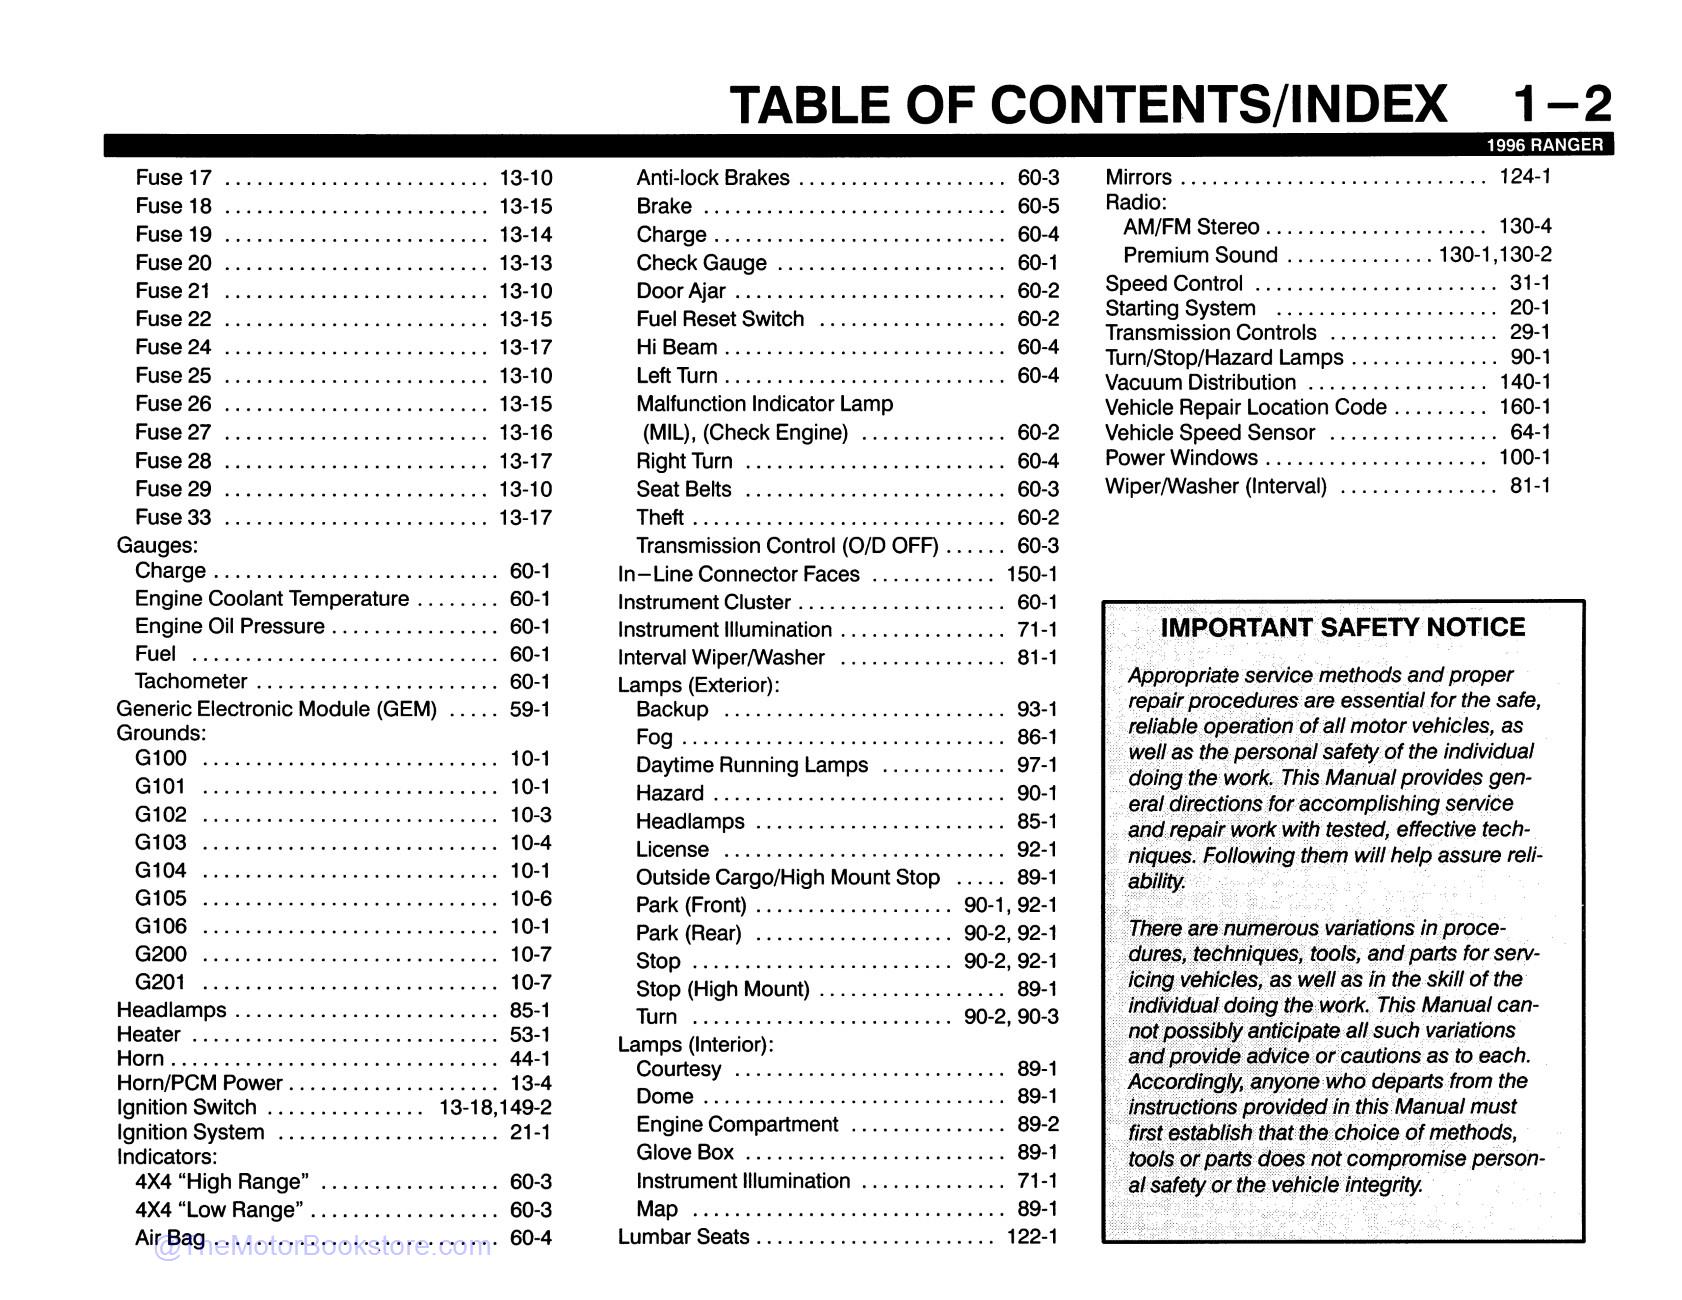 1996 Ford Ranger Electrical and Vacuum Troubleshooting Manual  - Table of Contents 2